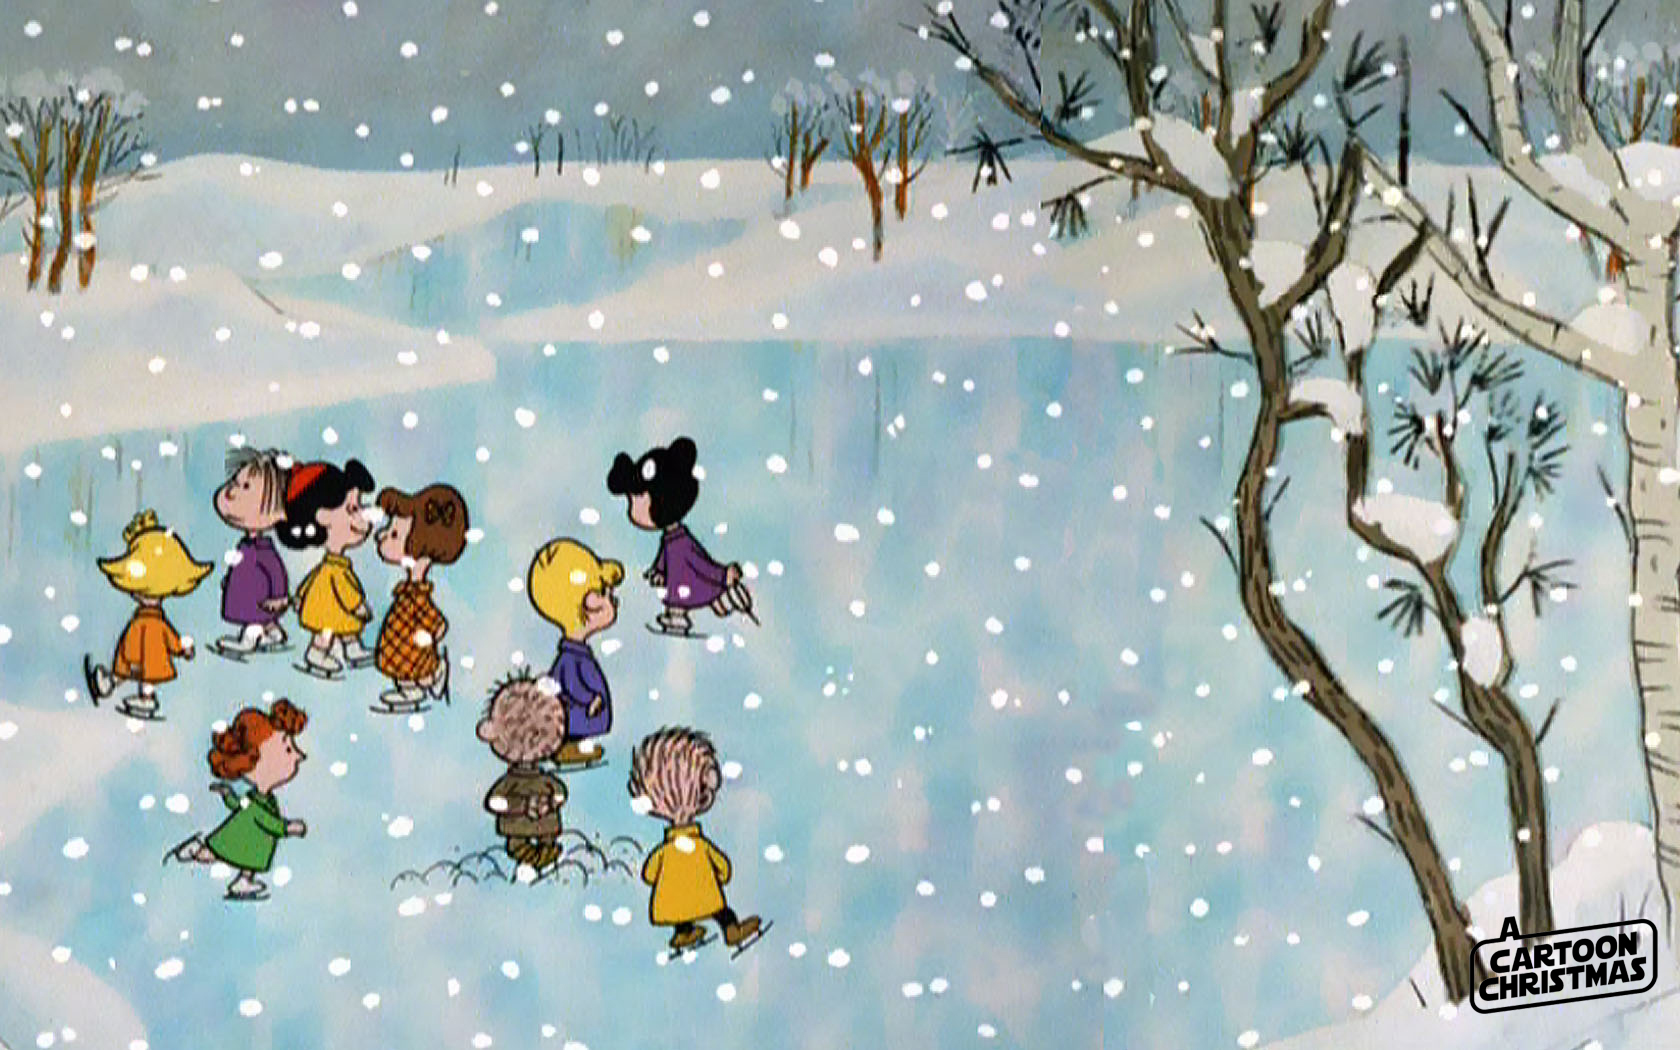 Get Your Charlie Brown Chrismas Wallpaper Right Here A Cartoon